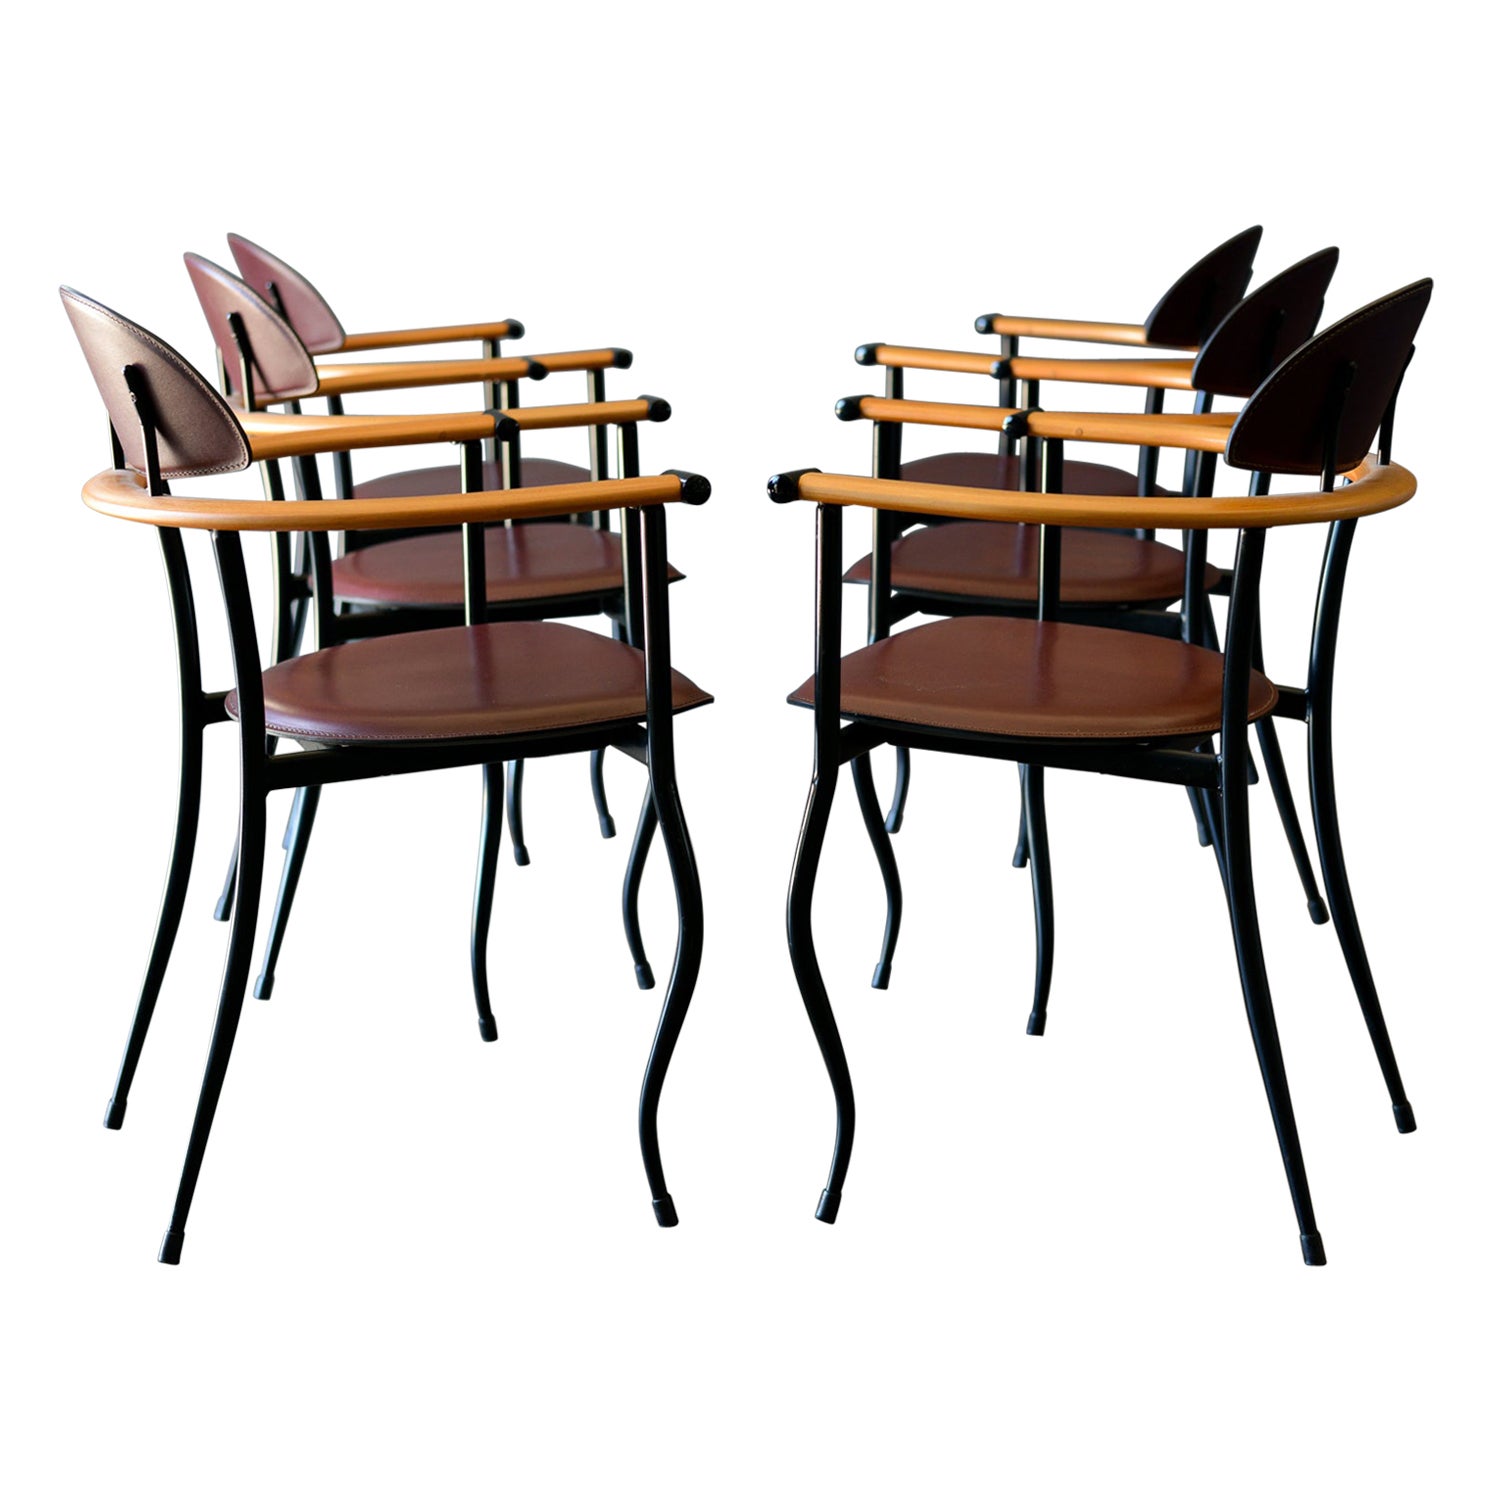 Set of 6 Stiletto 'Marilyn" Dining Chairs by Arrben of Italy, ca. 1980